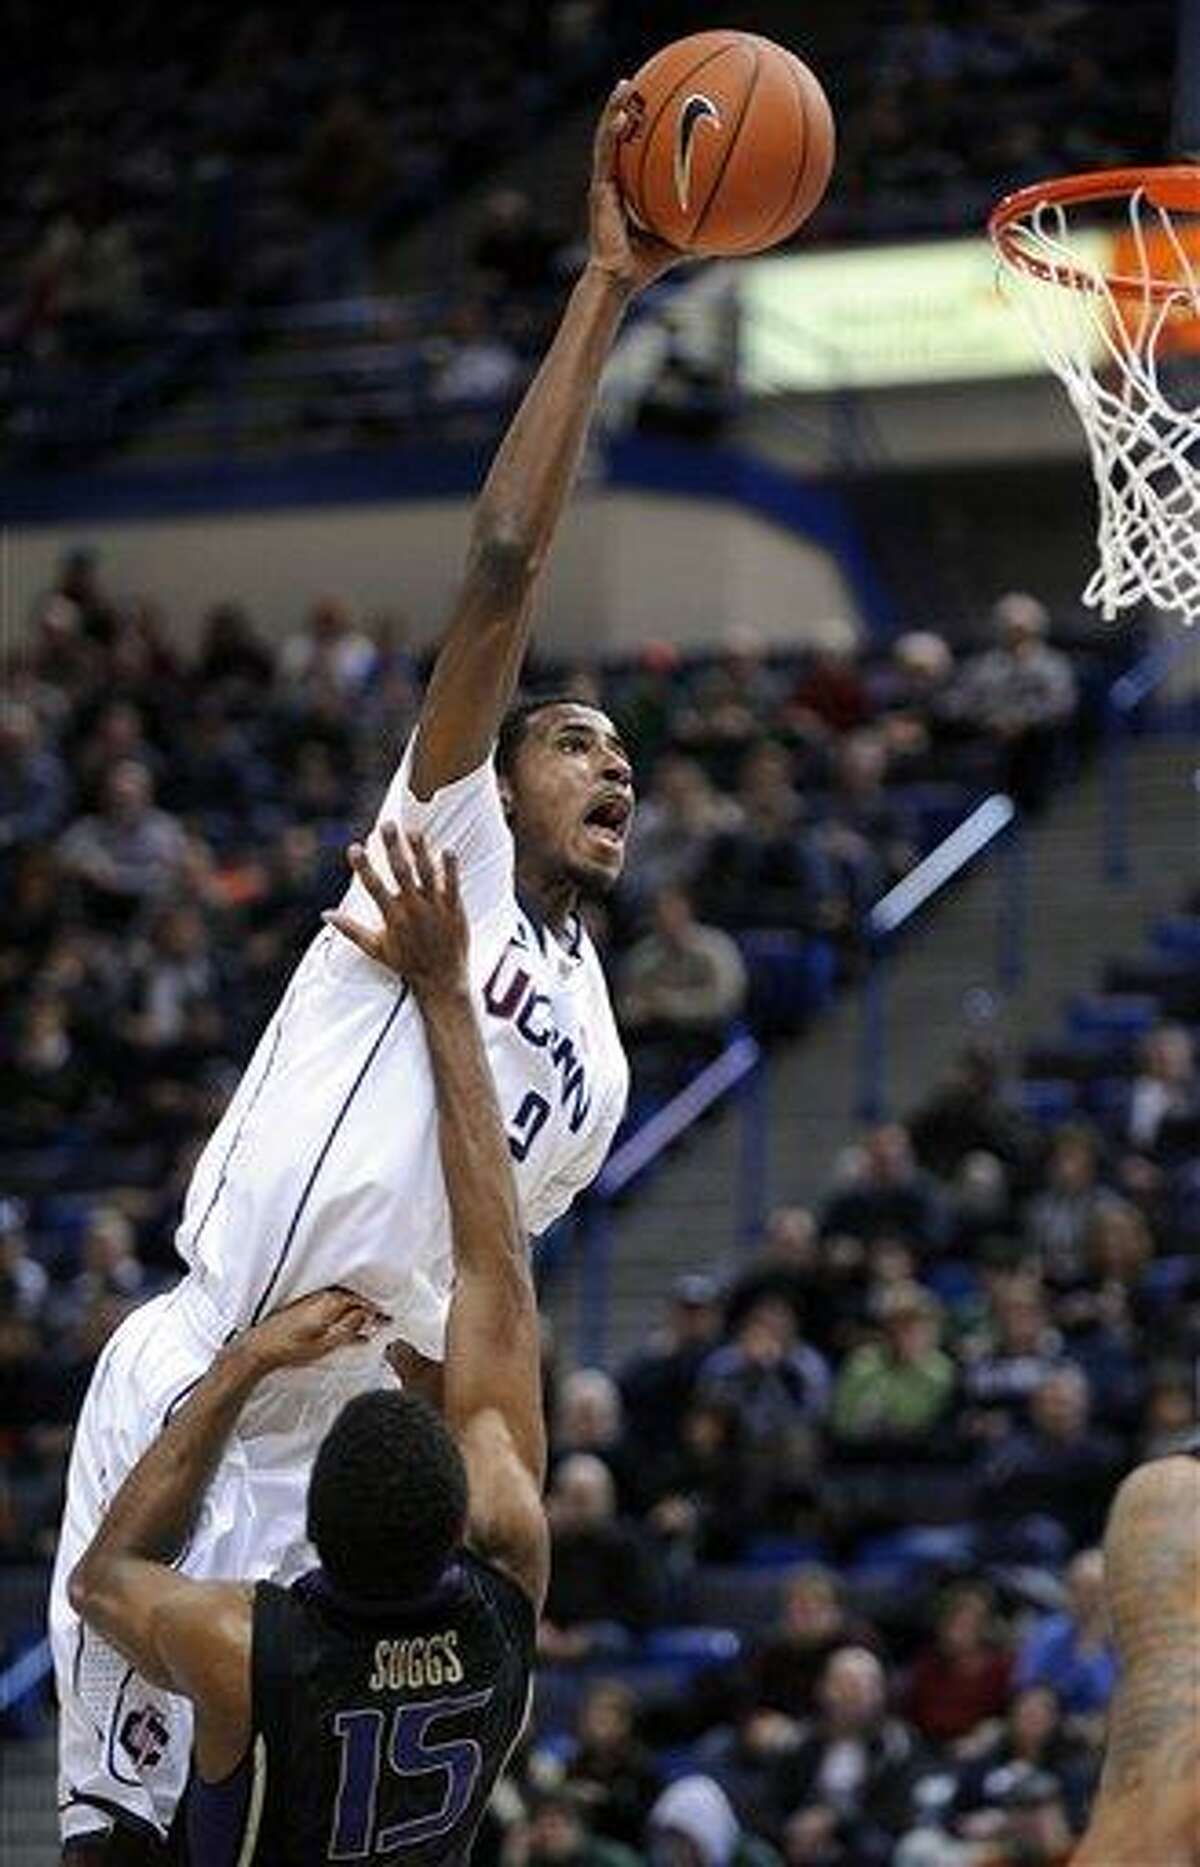 Connecticut's DeAndre Daniels, left, drives over Washington's Scott Suggs during the first half of an NCAA college basketball game in Hartford, Conn., Saturday, Dec. 29, 2012. (AP Photo/Fred Beckham)